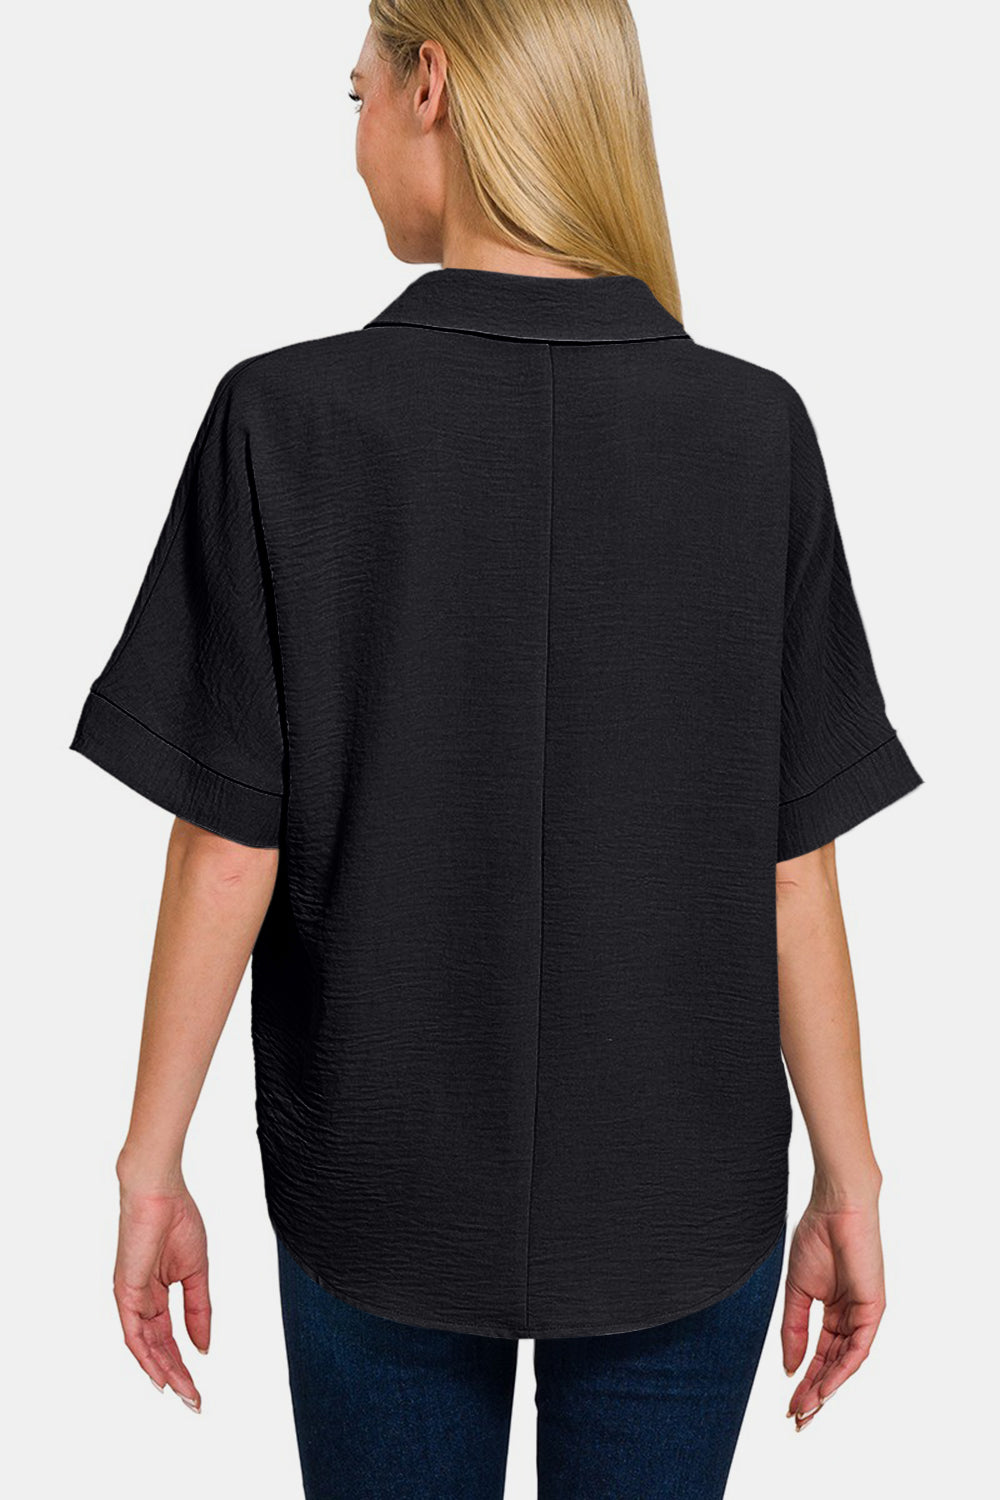 Timeless black collared blouse perfect for various occasions